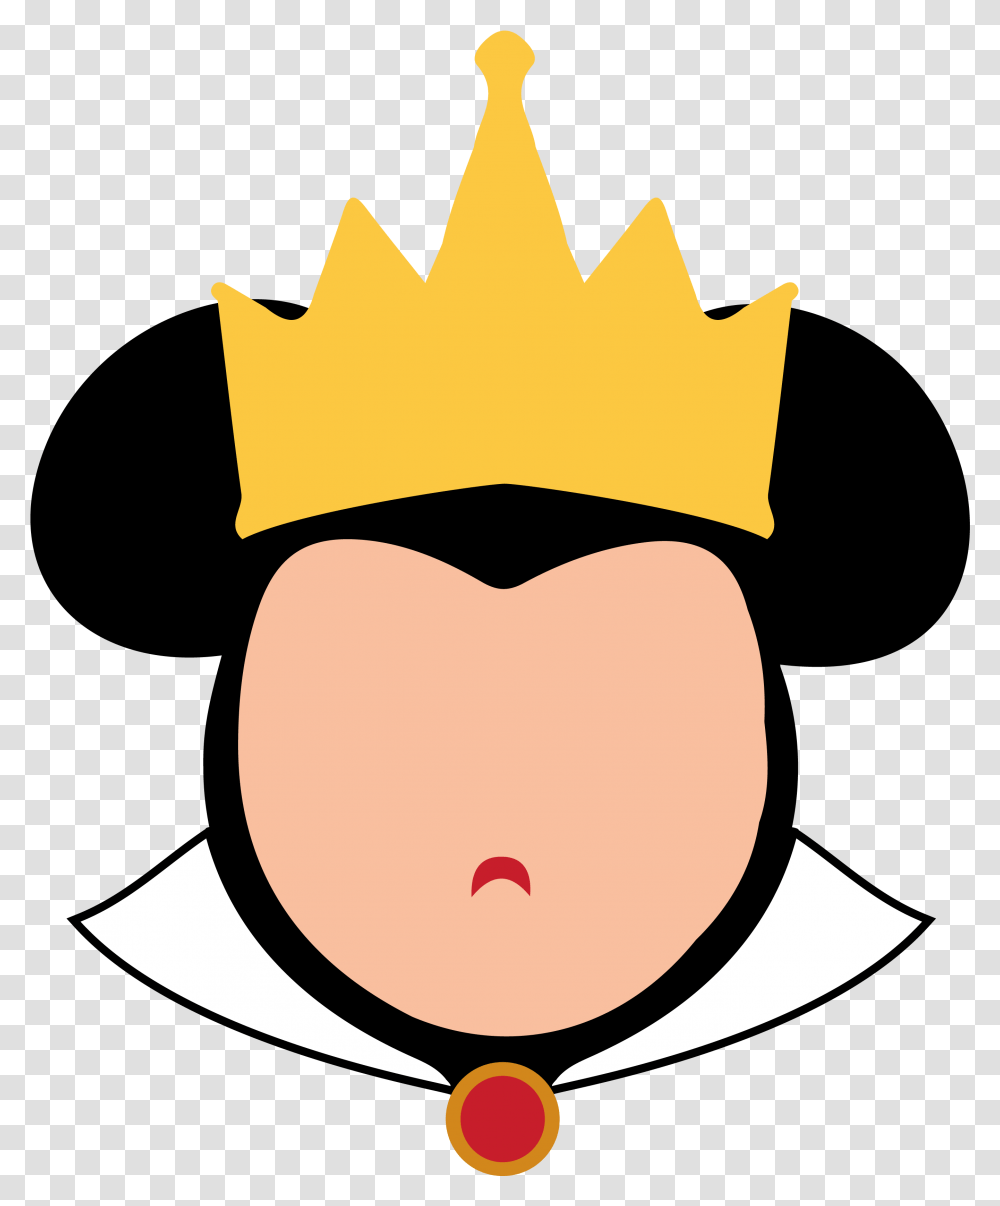 Mickey Mouse Minnie Mouse Evil Queen Snow White Snow White Evil Queen Silhouette, Crown, Jewelry, Accessories, Accessory Transparent Png